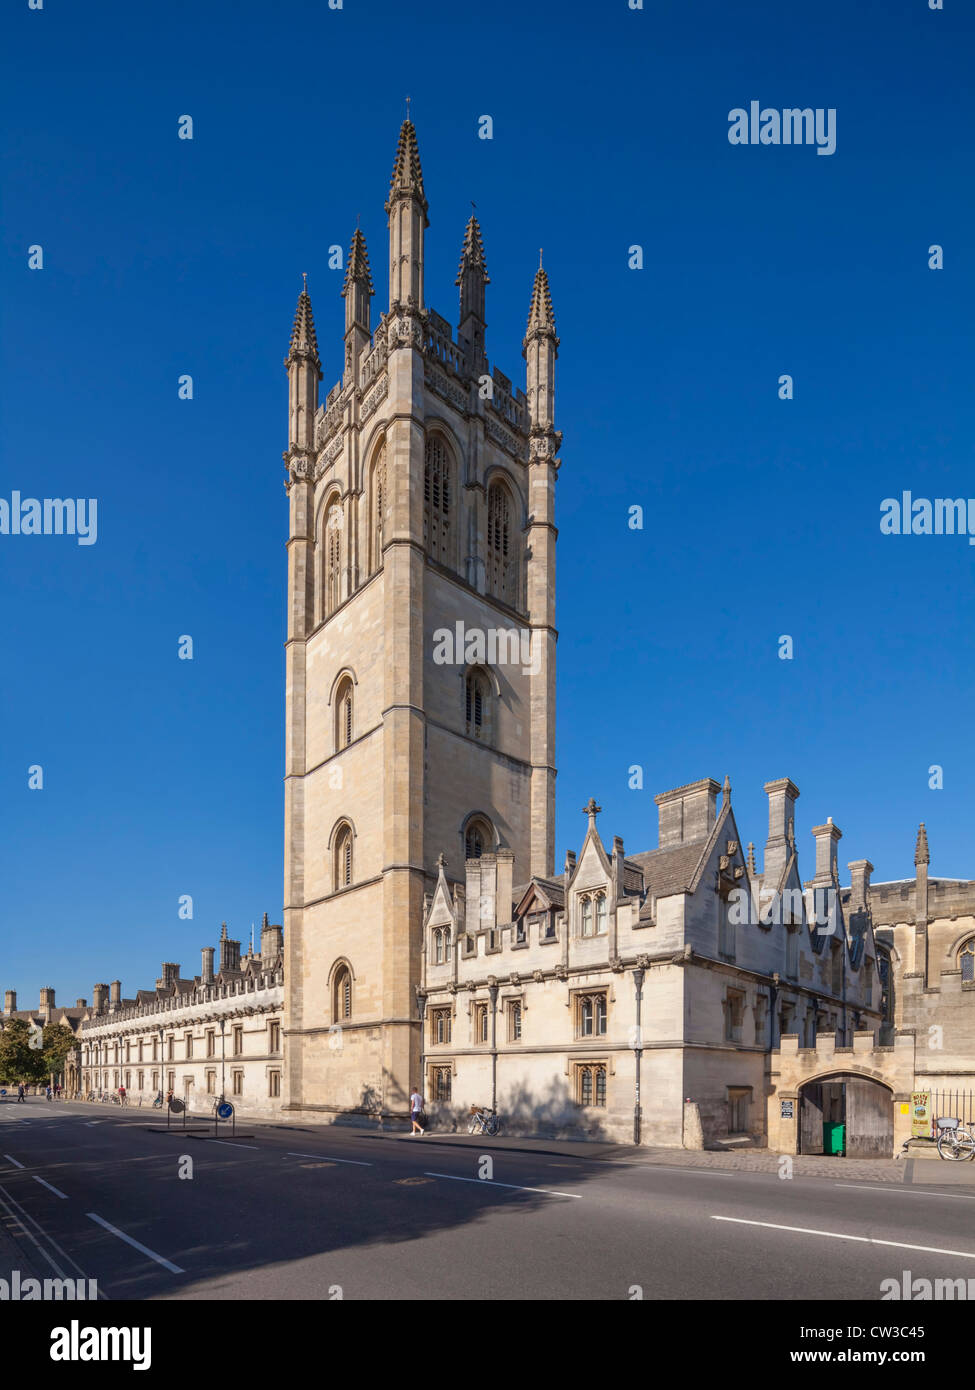 Magdalen College Great Tower, Oxford Stockfoto